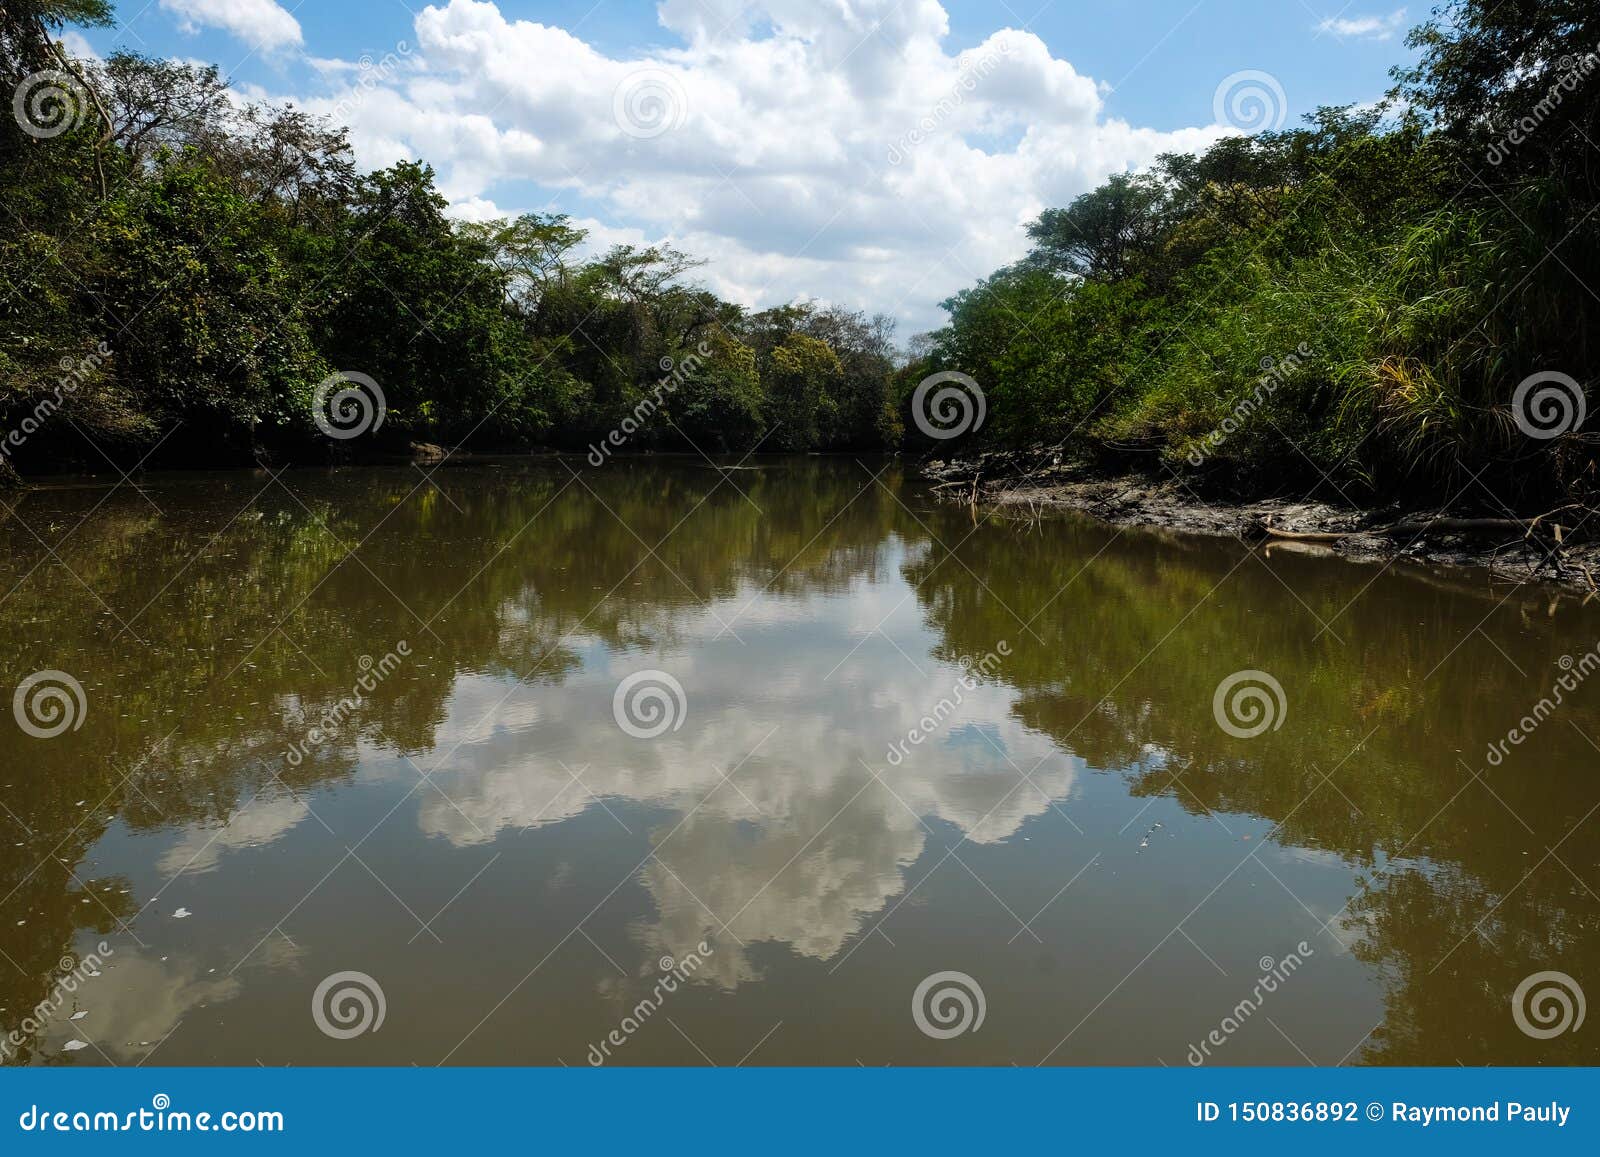 clouds reflected on tempisque river.